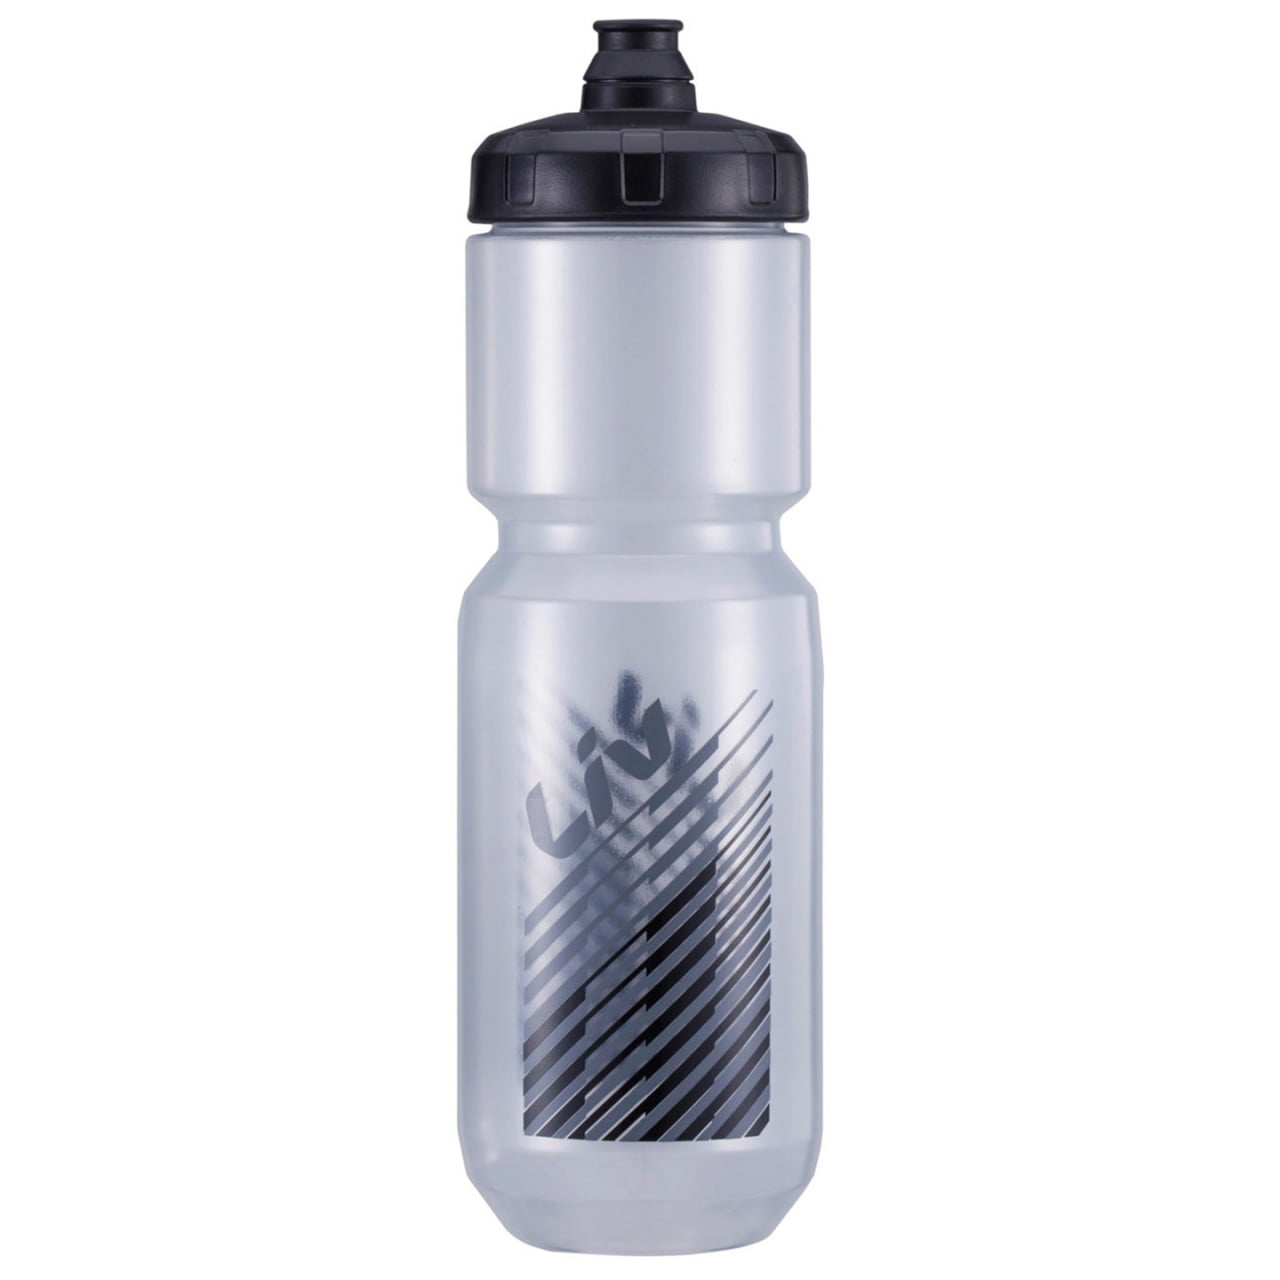 Doublespring 750 ml Water Bottle